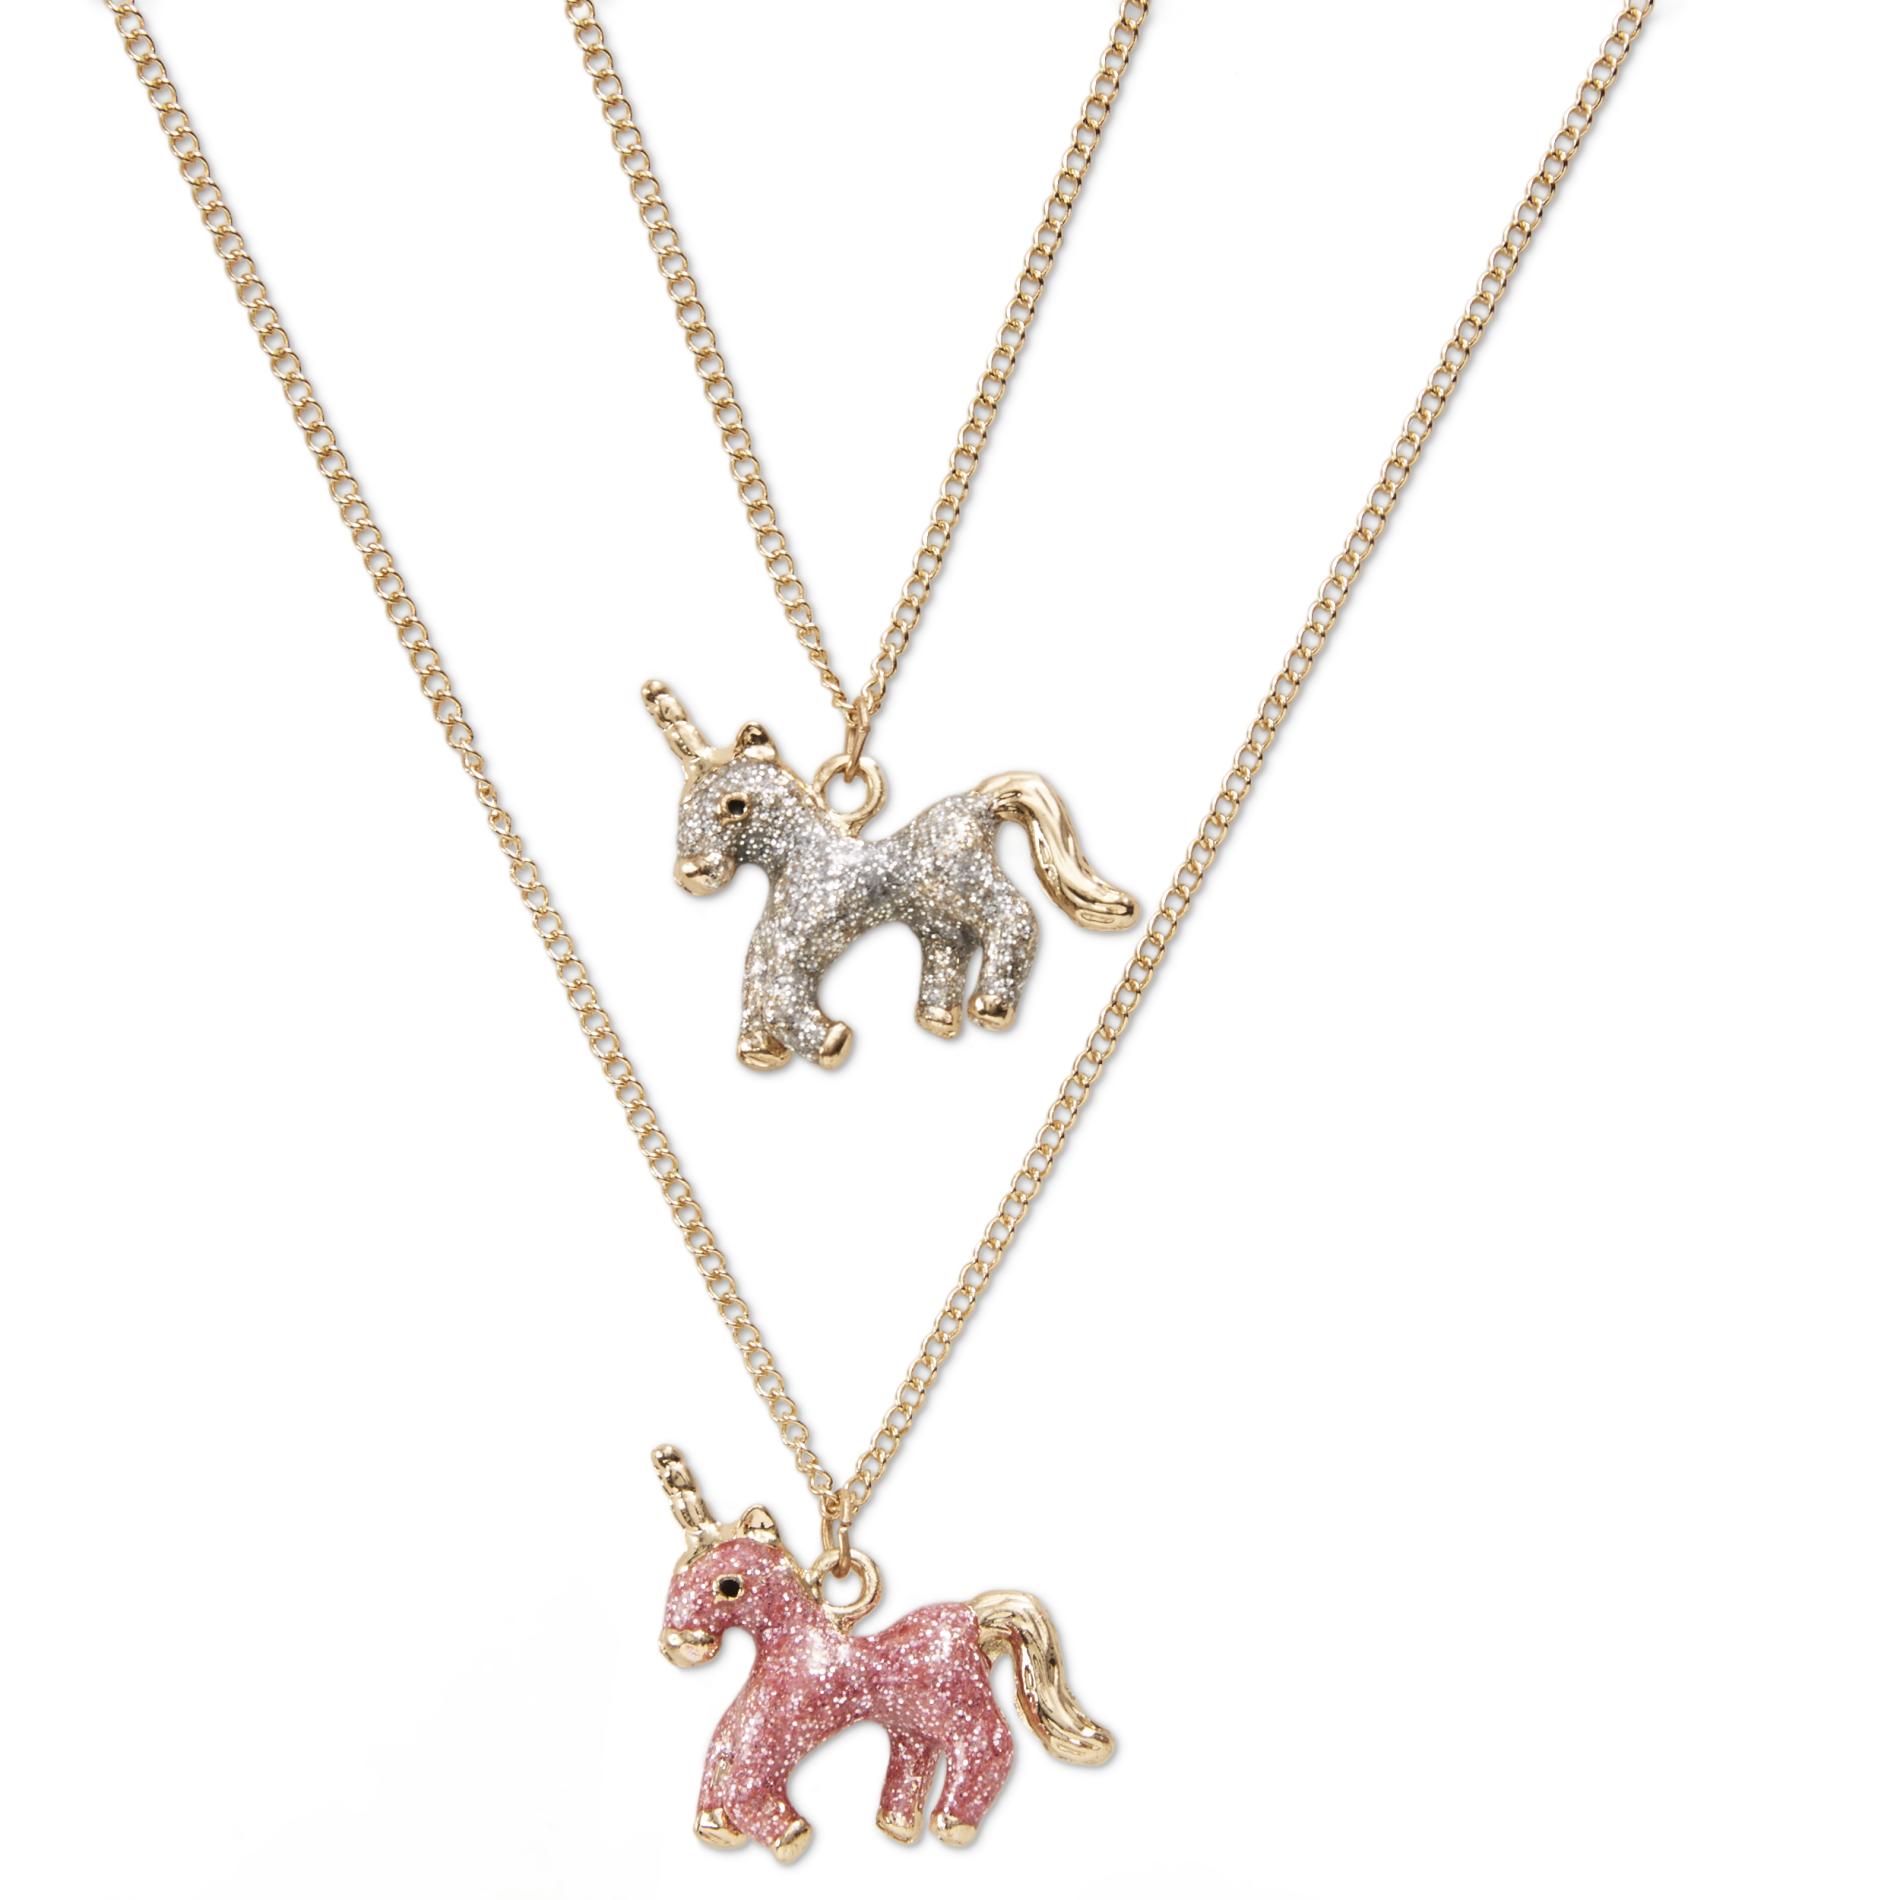 Attention Girls' 2-Pack Goldtone Necklaces - Unicorn